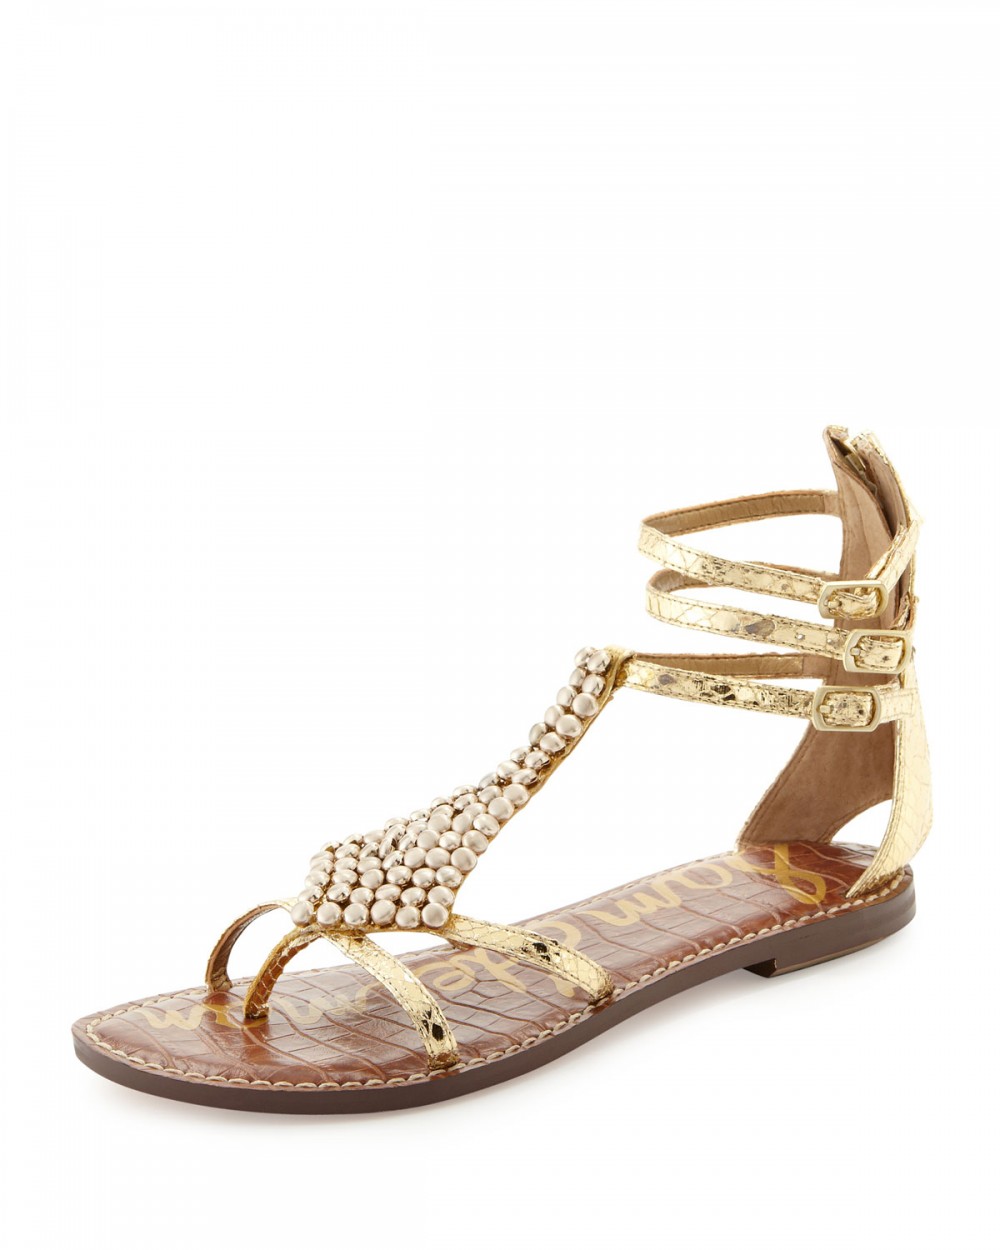 6 Great Spring/Summer Sandal Trends – Fashion Gone Rogue